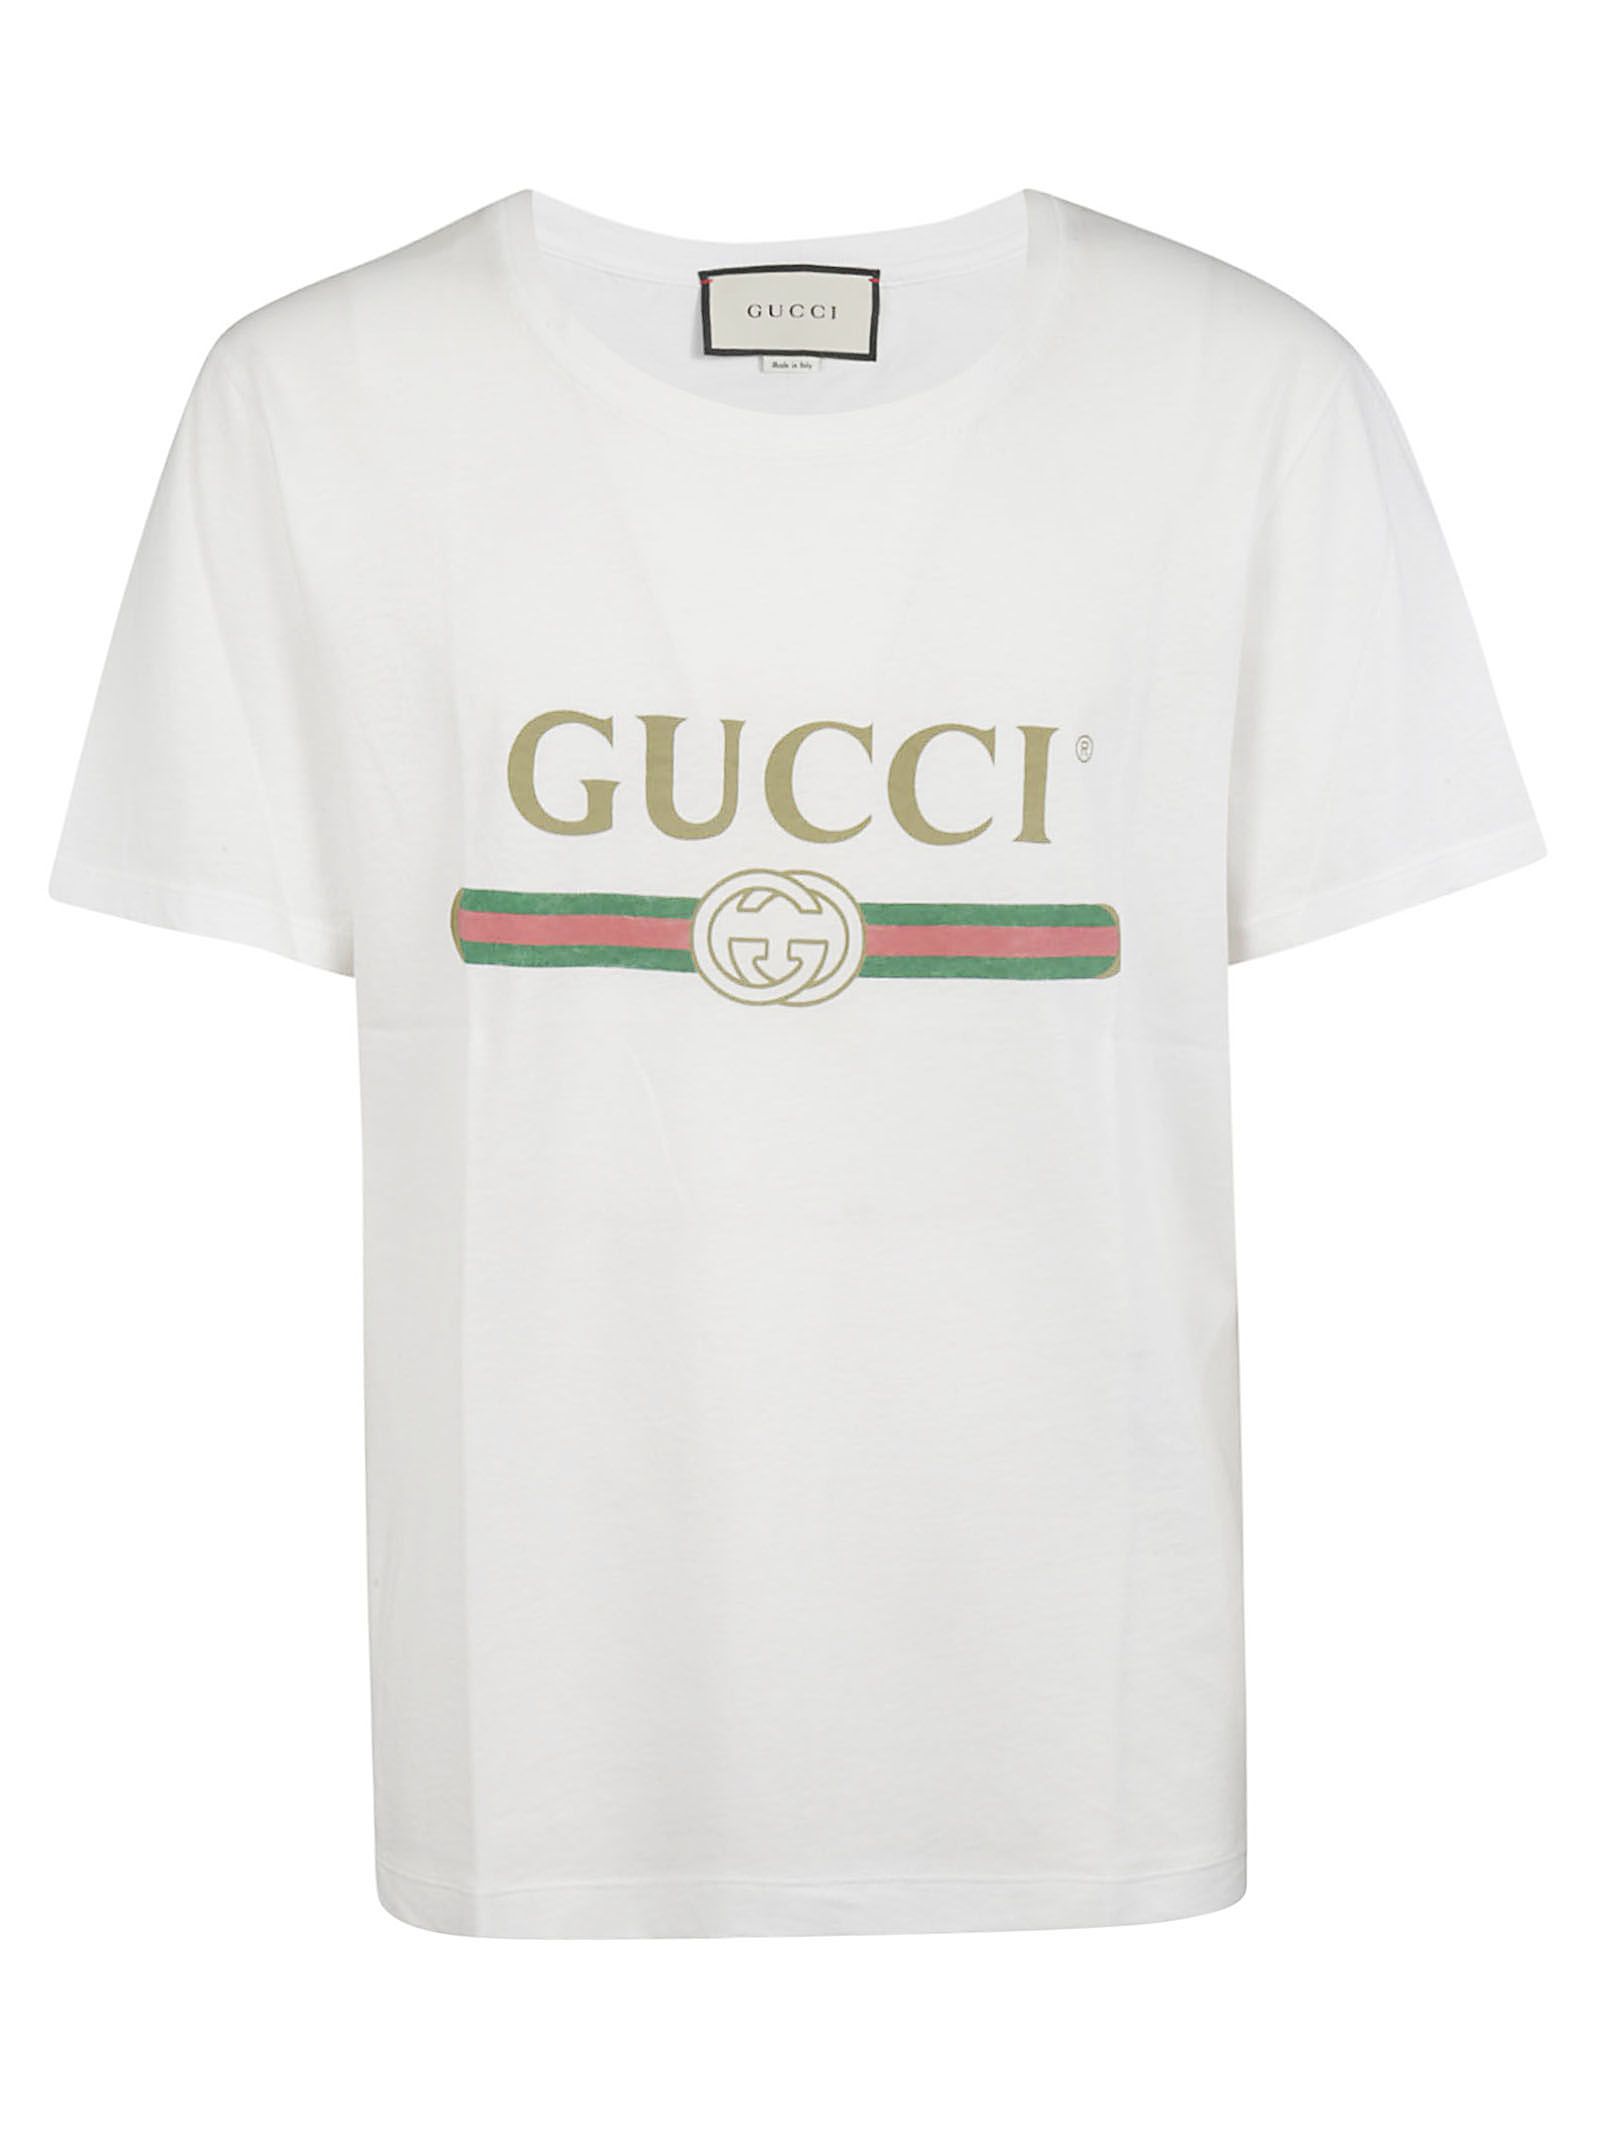 Gucci Distressed Printed Cotton-Jersey T-Shirt - White | ModeSens